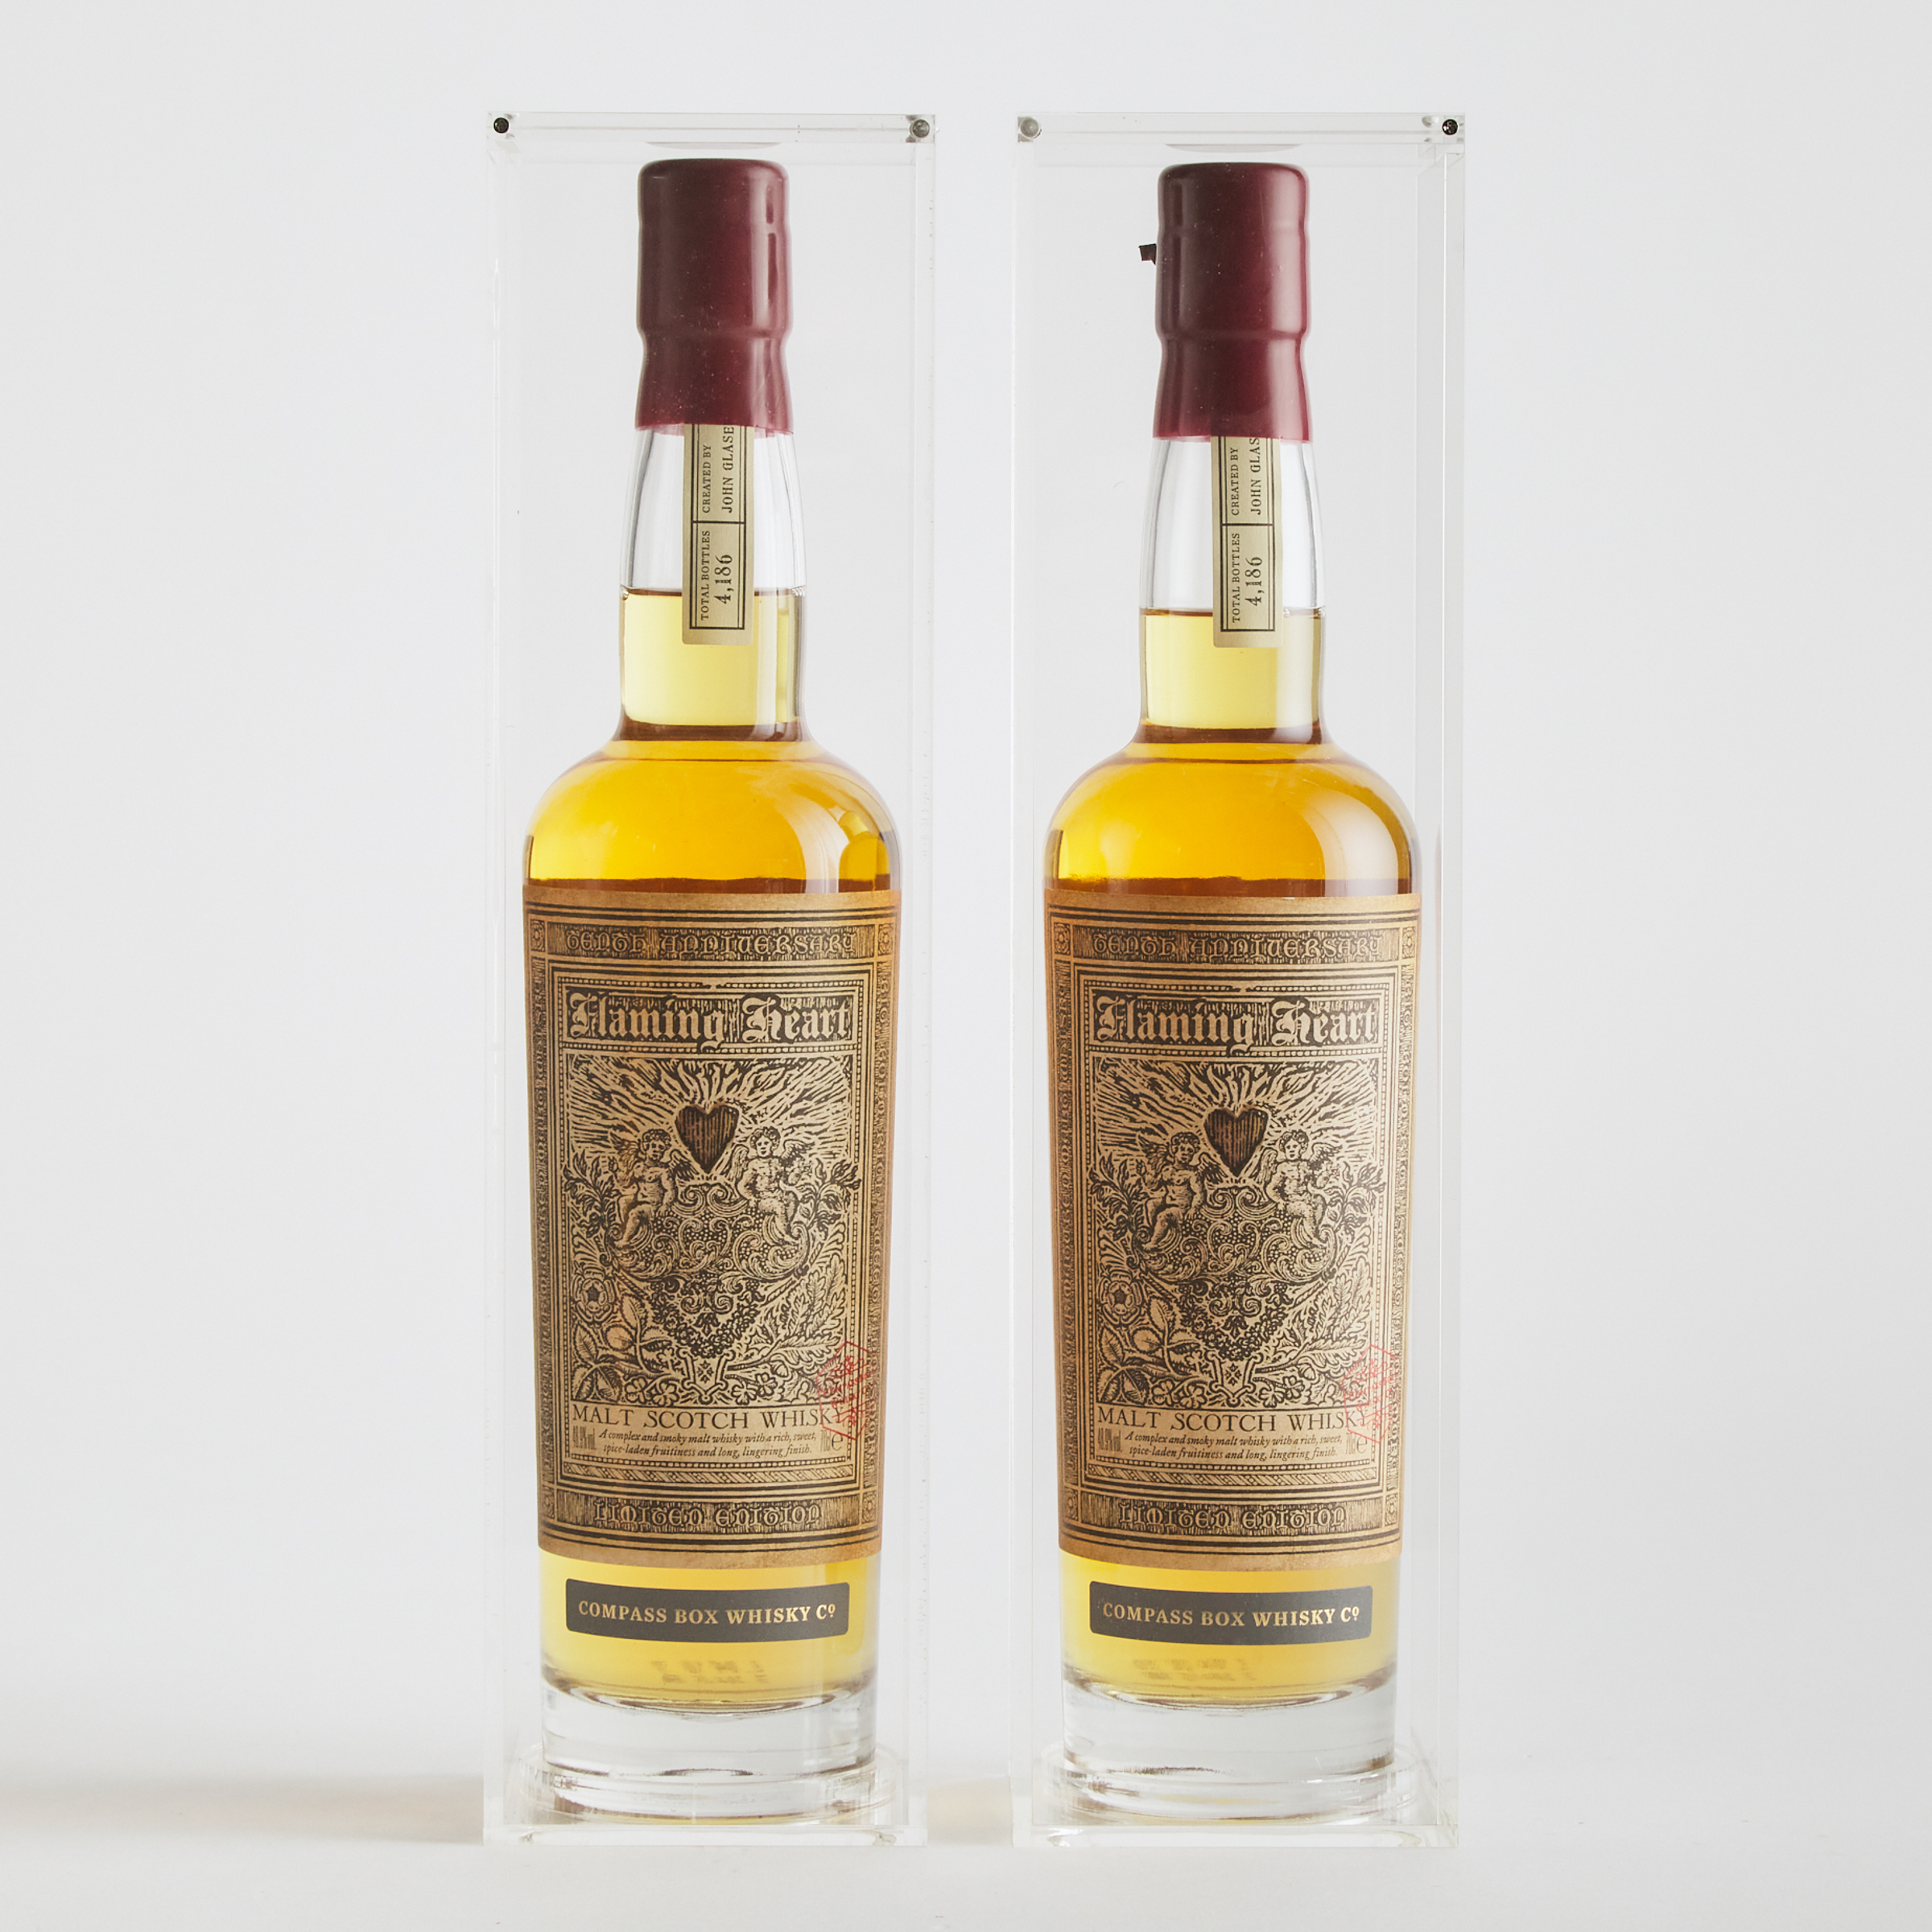 COMPASS BOX BLENDED MALT SCOTCH WHISKY NAS (TWO 70 CL)